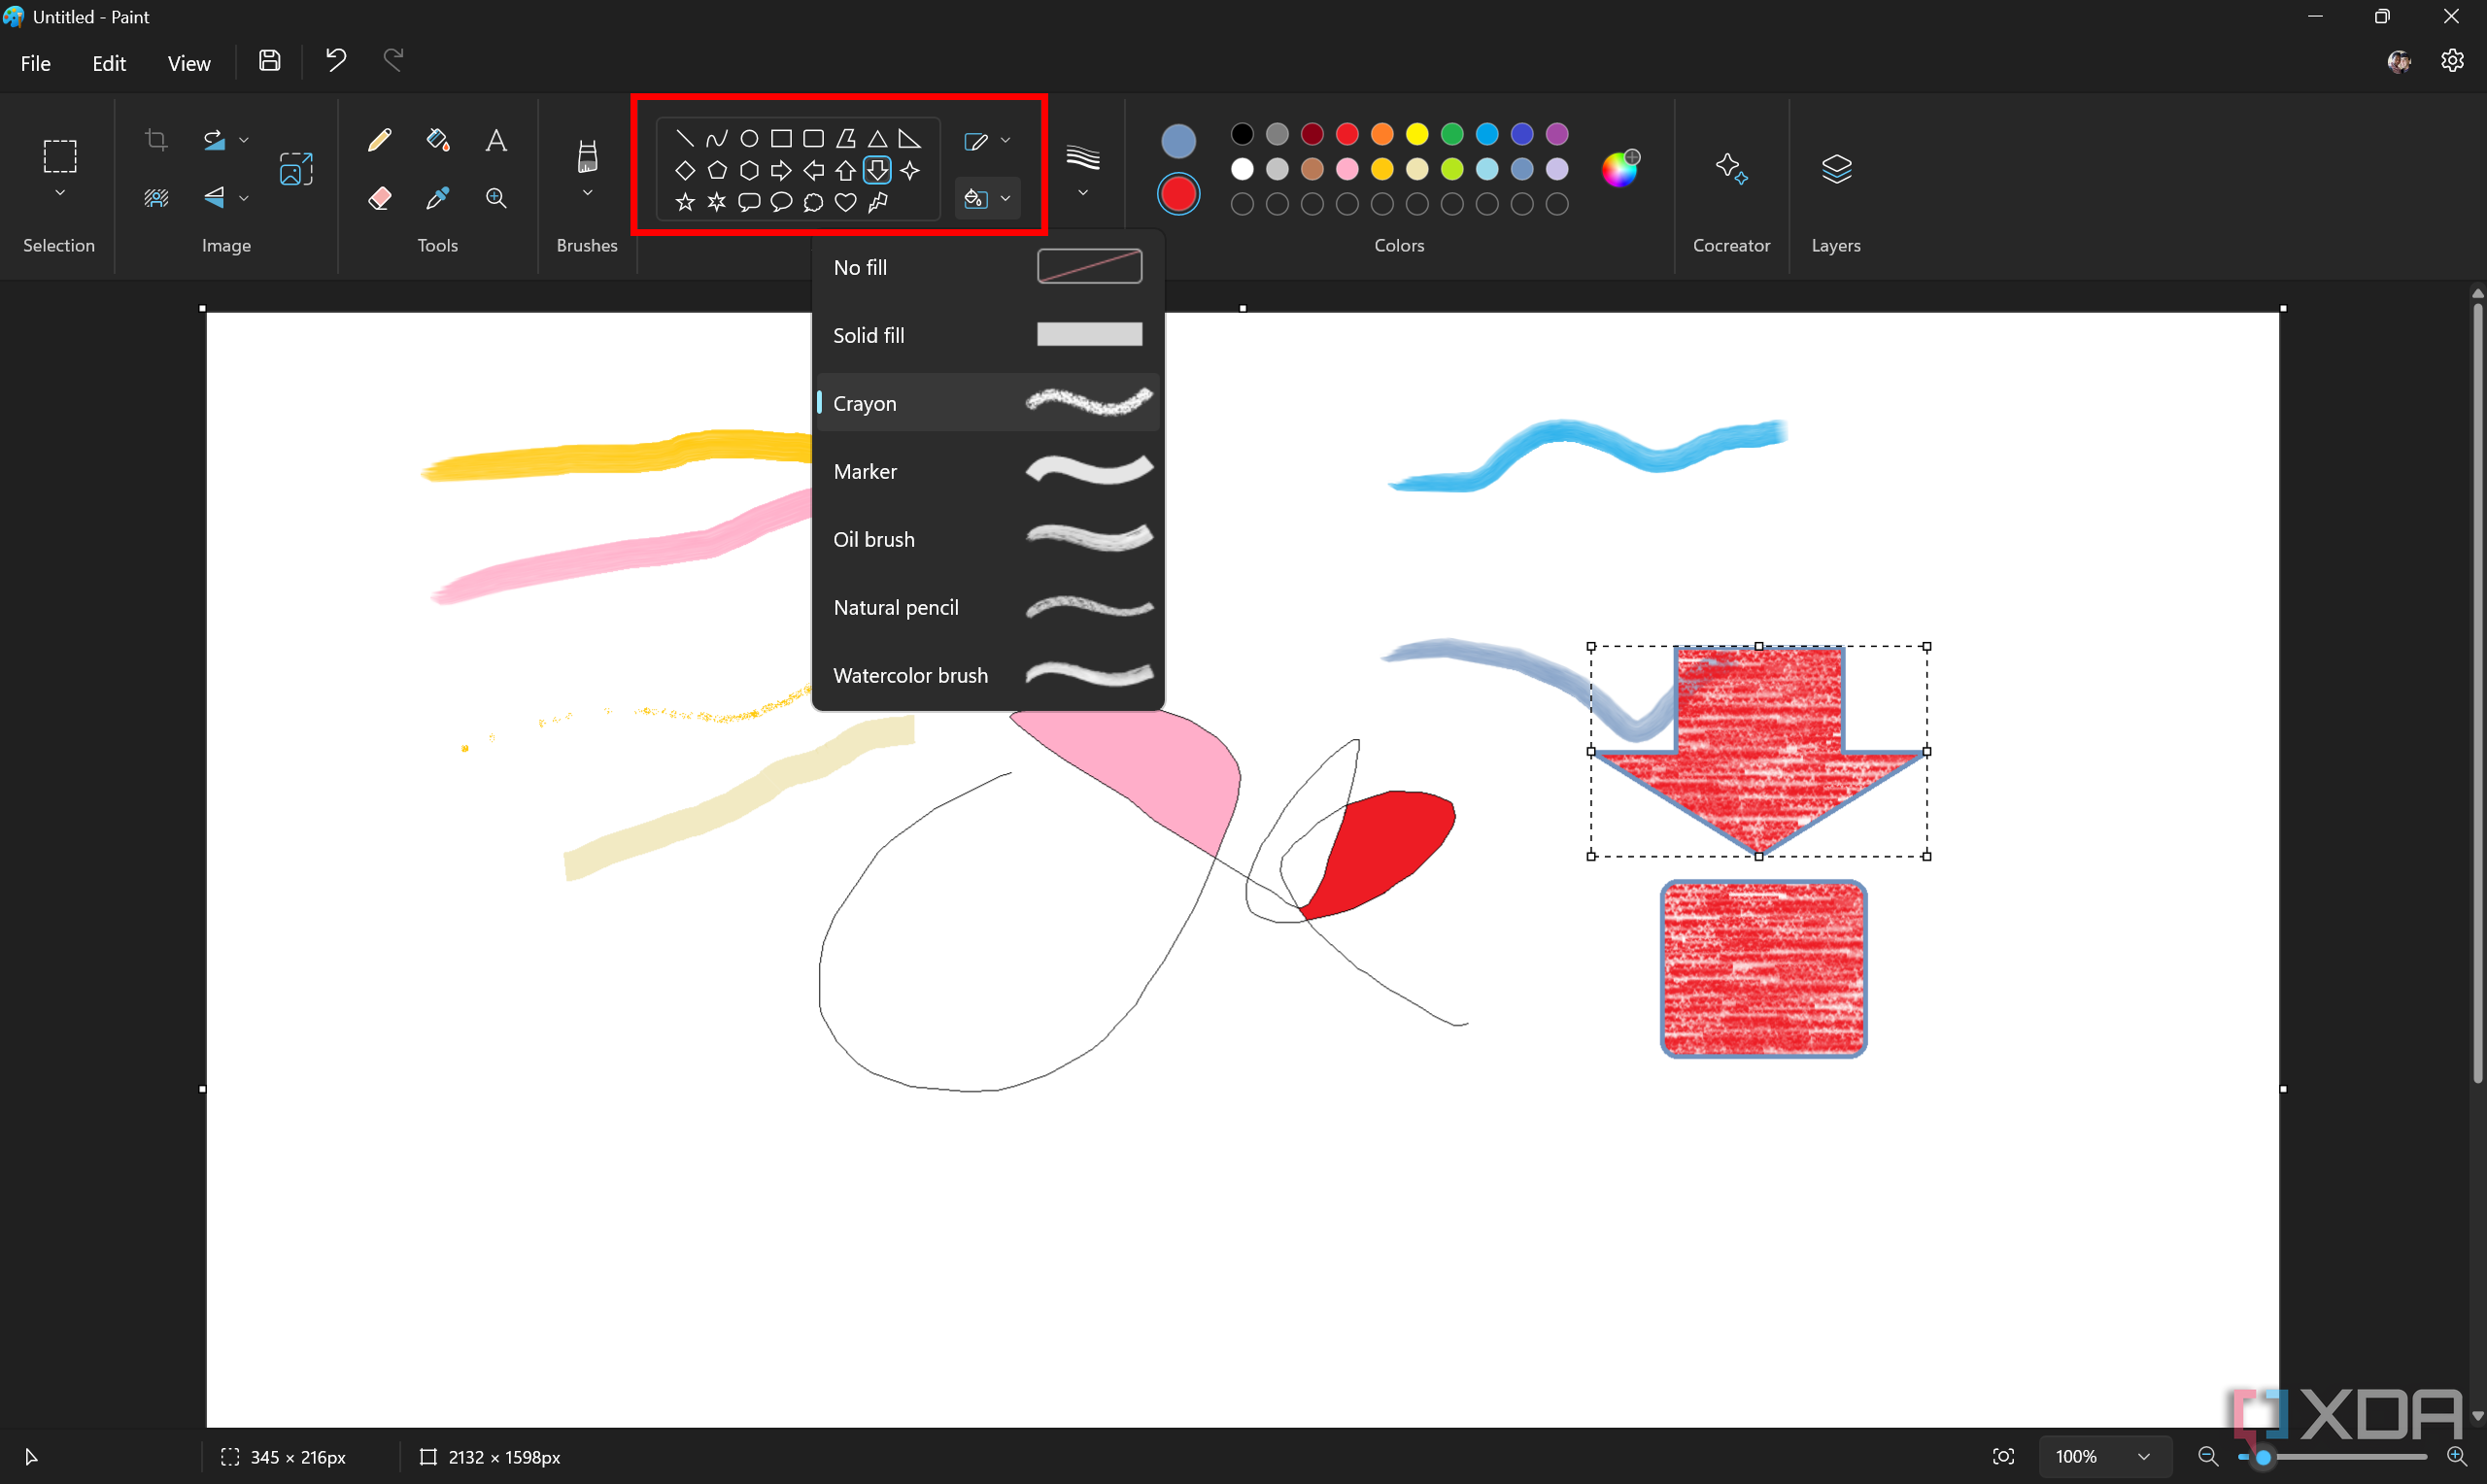 Screenshot of Paint with the Shapes section highlighted and the fill dropdown menu open. Some shapes have also been drawn on the canvas